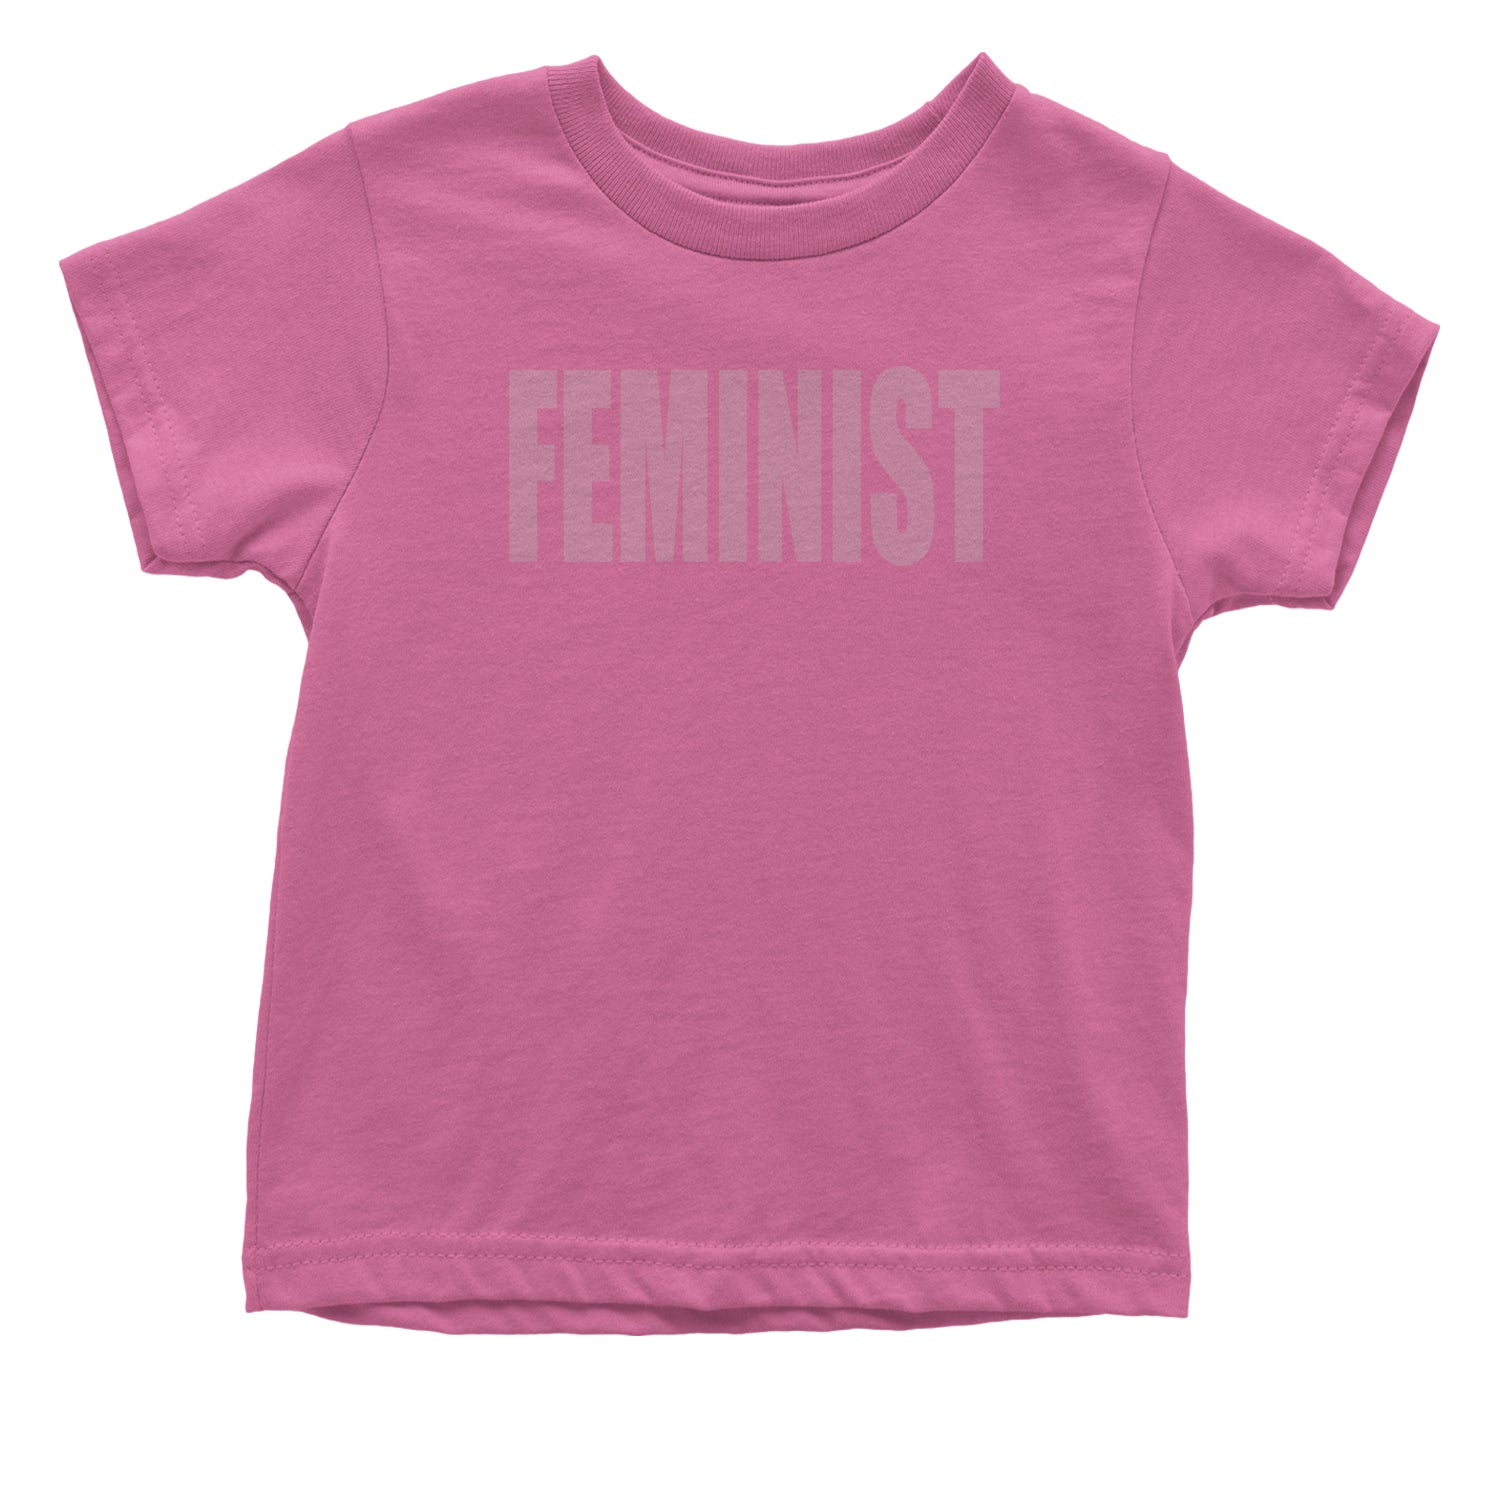 Feminist (Pink Print) Infant One-Piece Romper Bodysuit and Toddler T-shirt a, equal, equality, feminism, feminist, gender, is, lgbtq, like, looks, nevertheless, pay, persisted, rights, she, this, what by Expression Tees